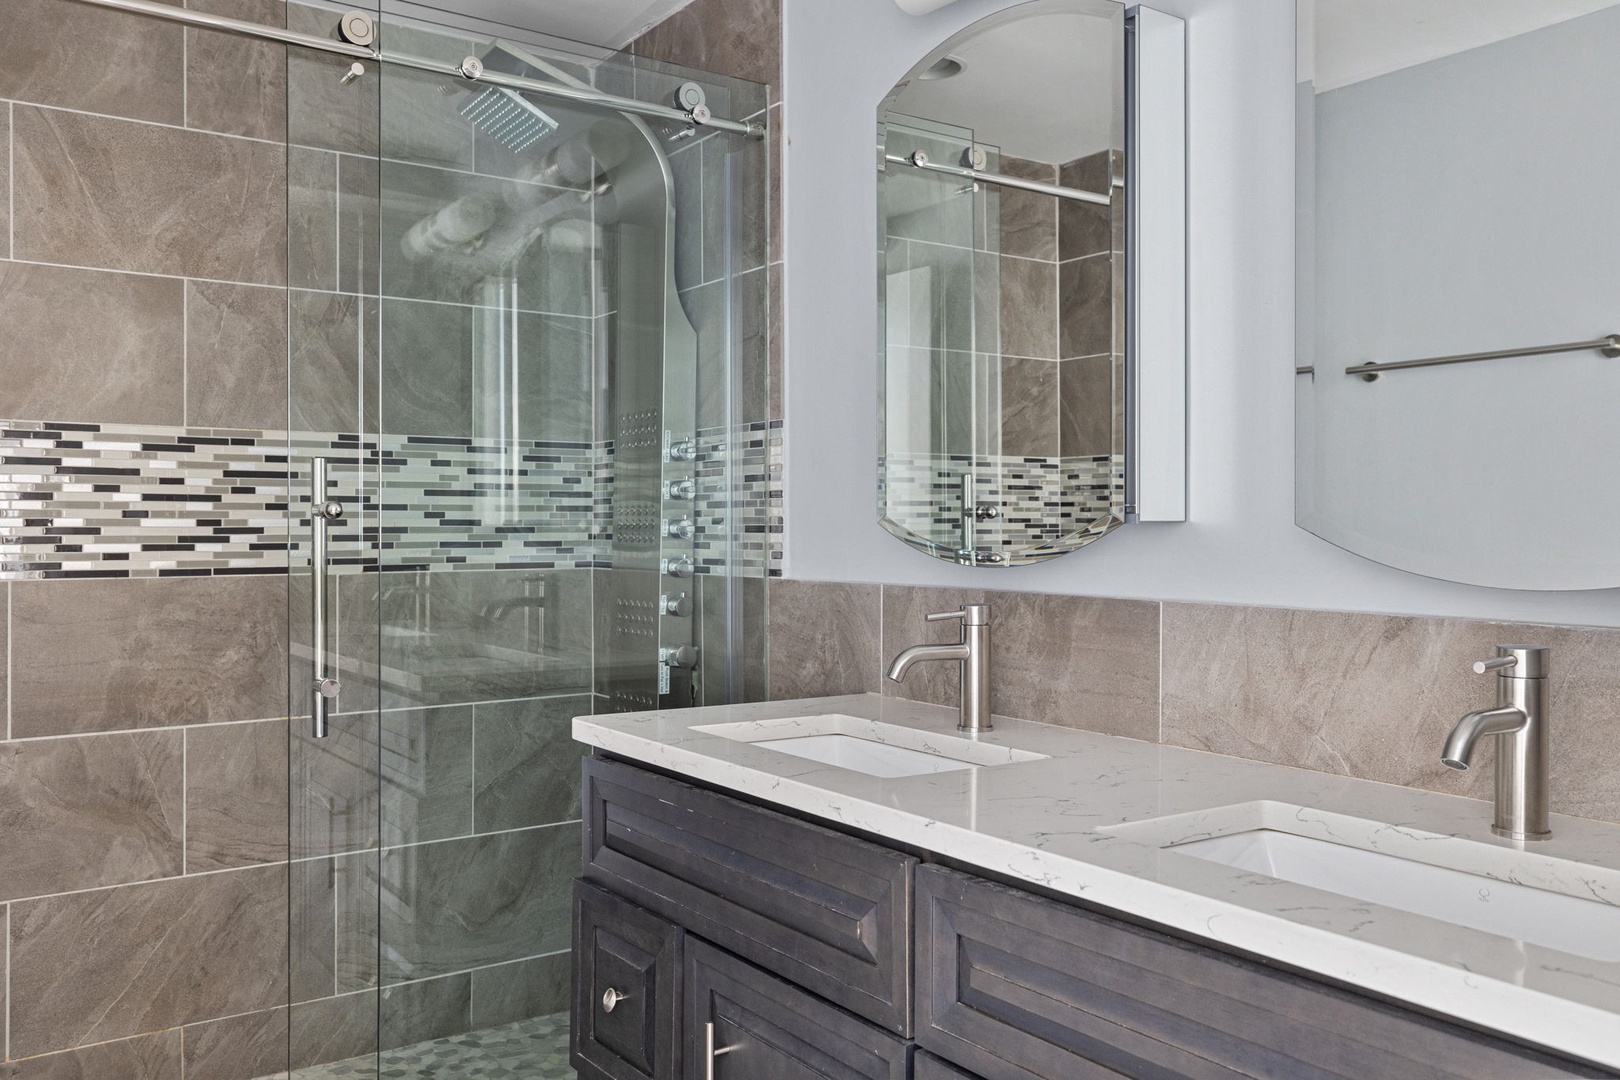 This beautifully designed bathroom features a spacious, tiled walk-in shower.